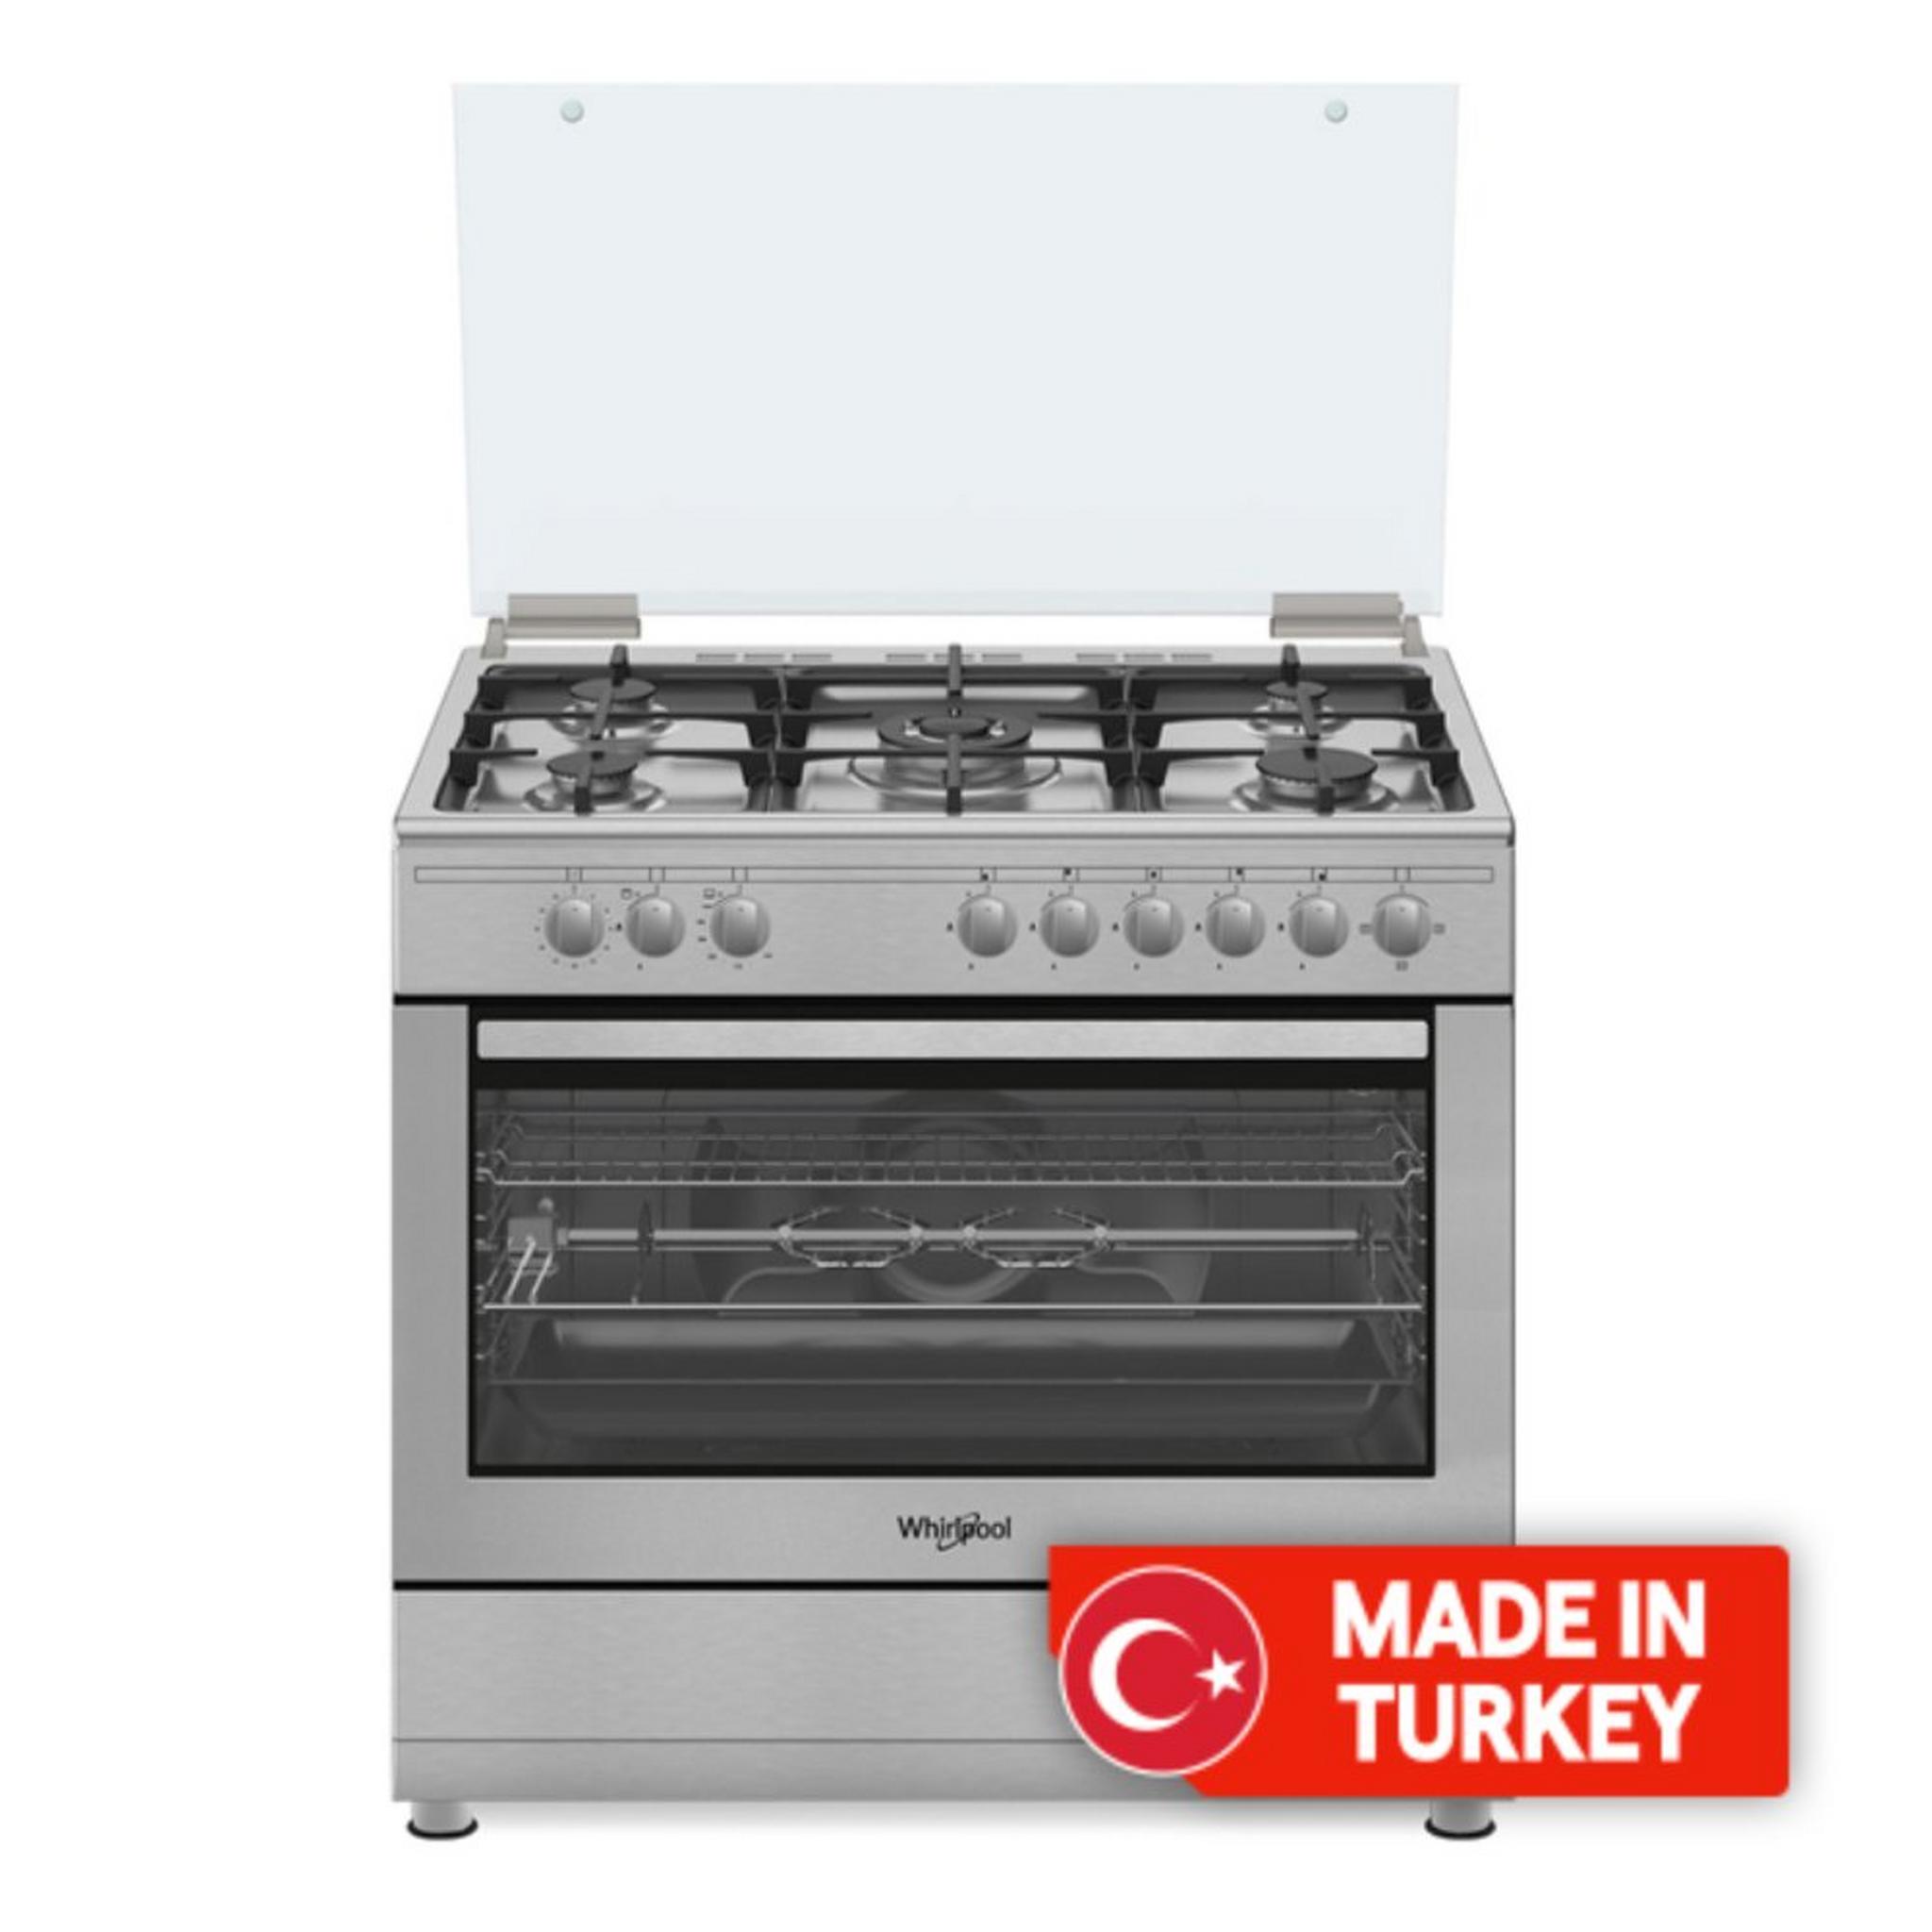 Whirlpool 5 Burners Gas Cooker, 90X60cm, WM9GC1KCX/MEA - Stainless Steel